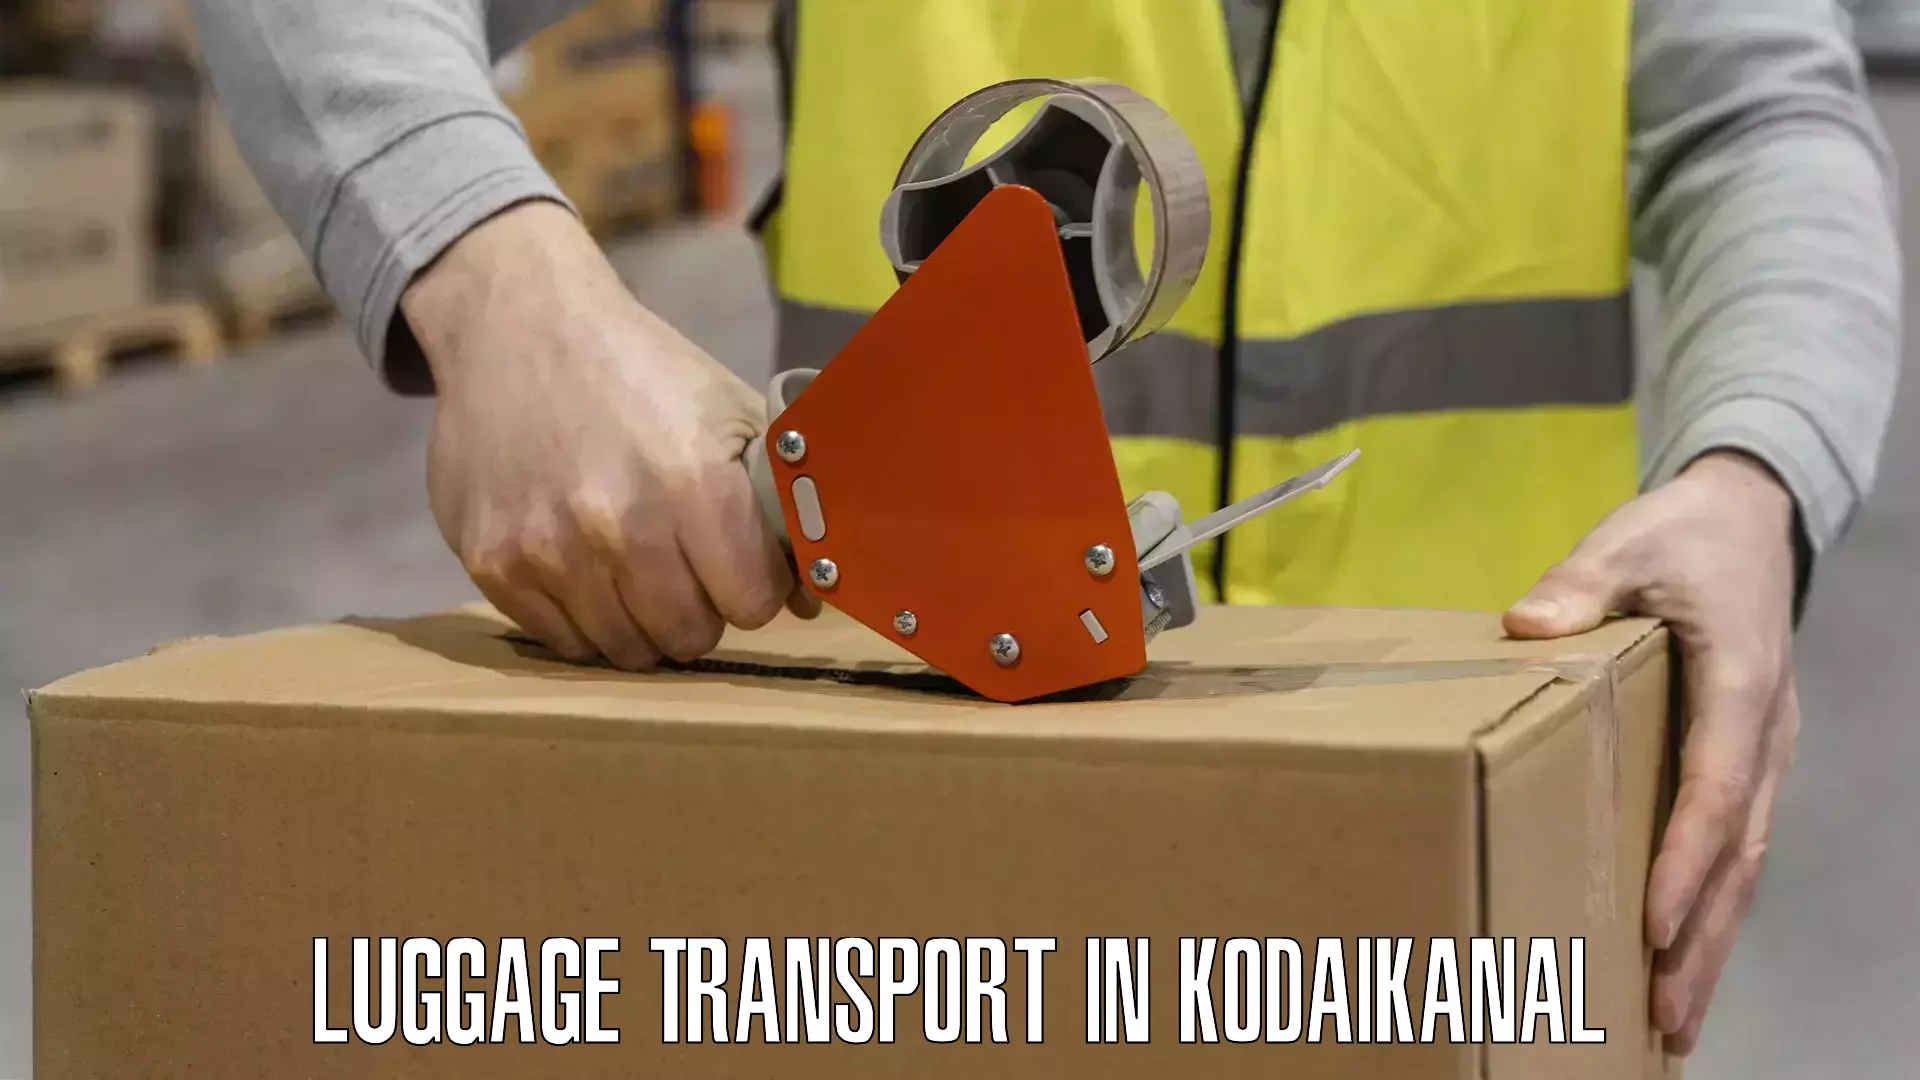 Luggage delivery providers in Kodaikanal